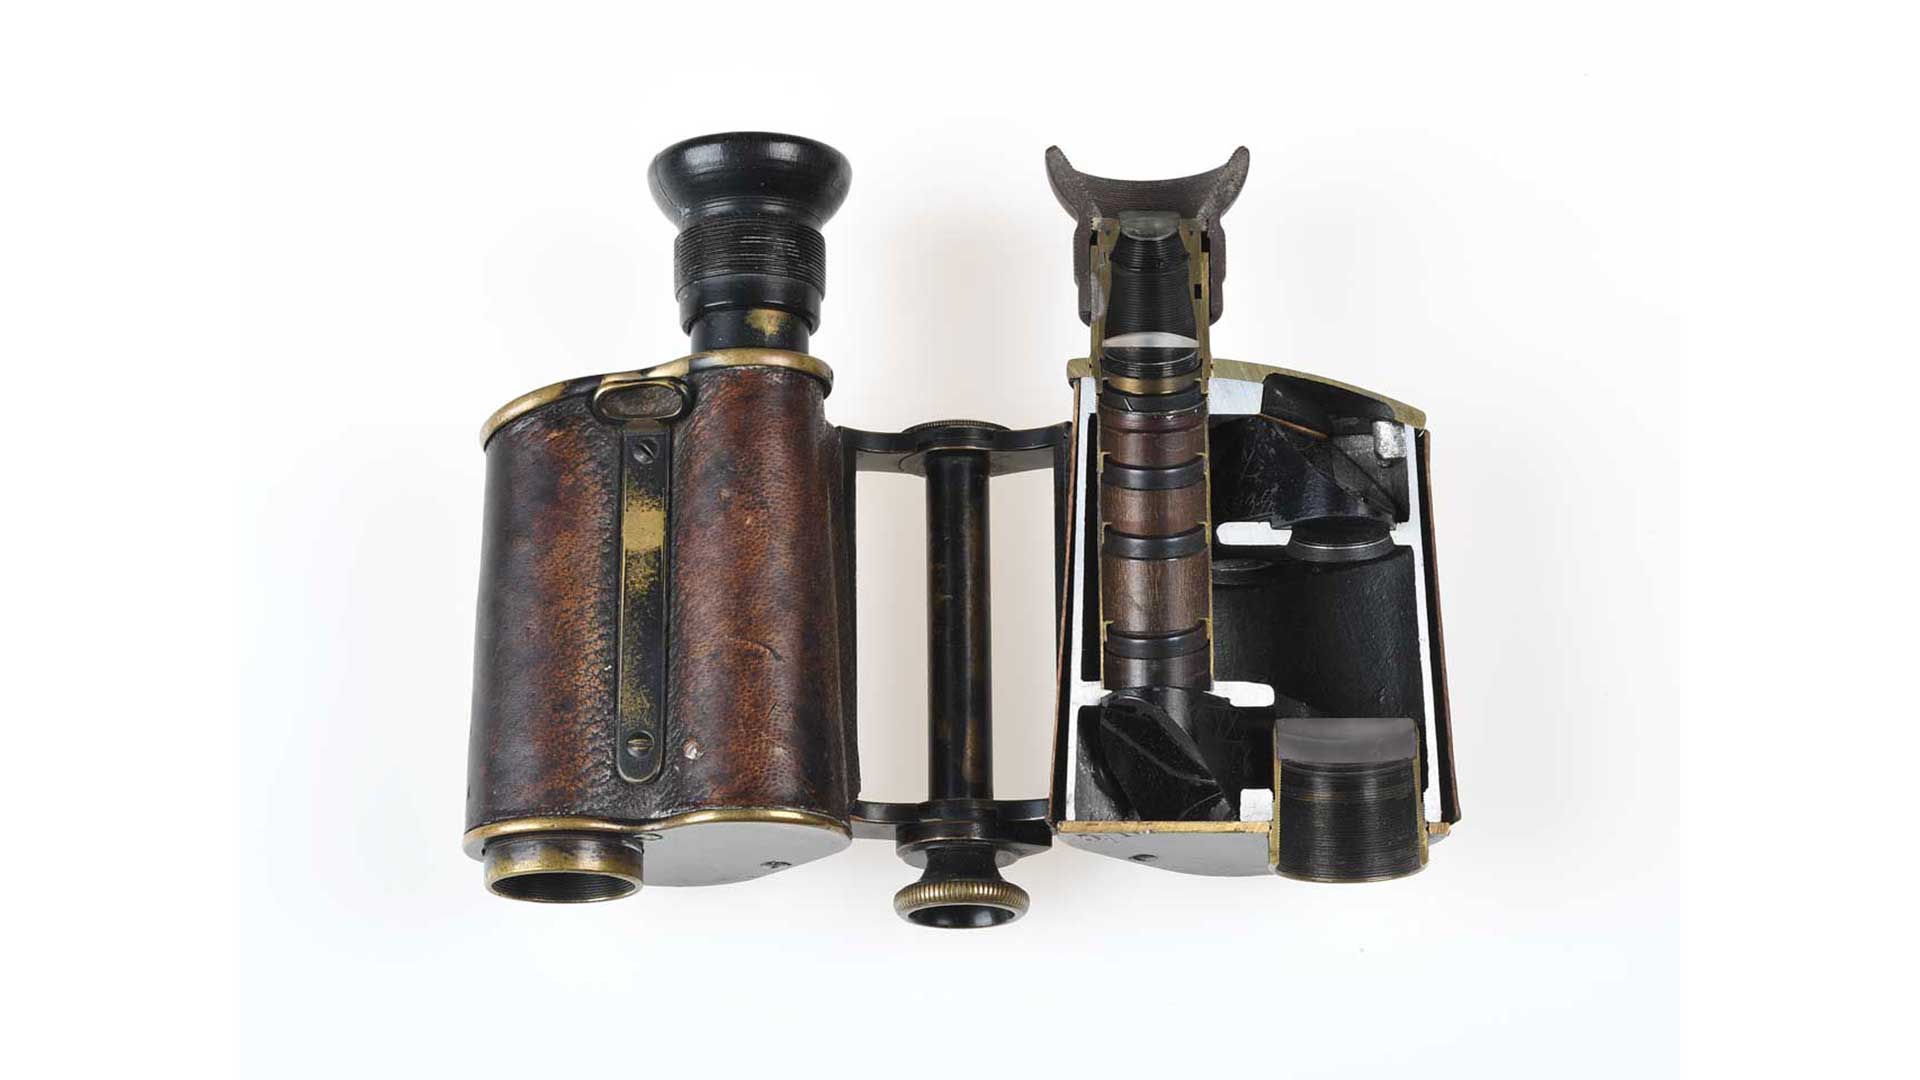 Prism binoculars with a greater distance between the objective lenses